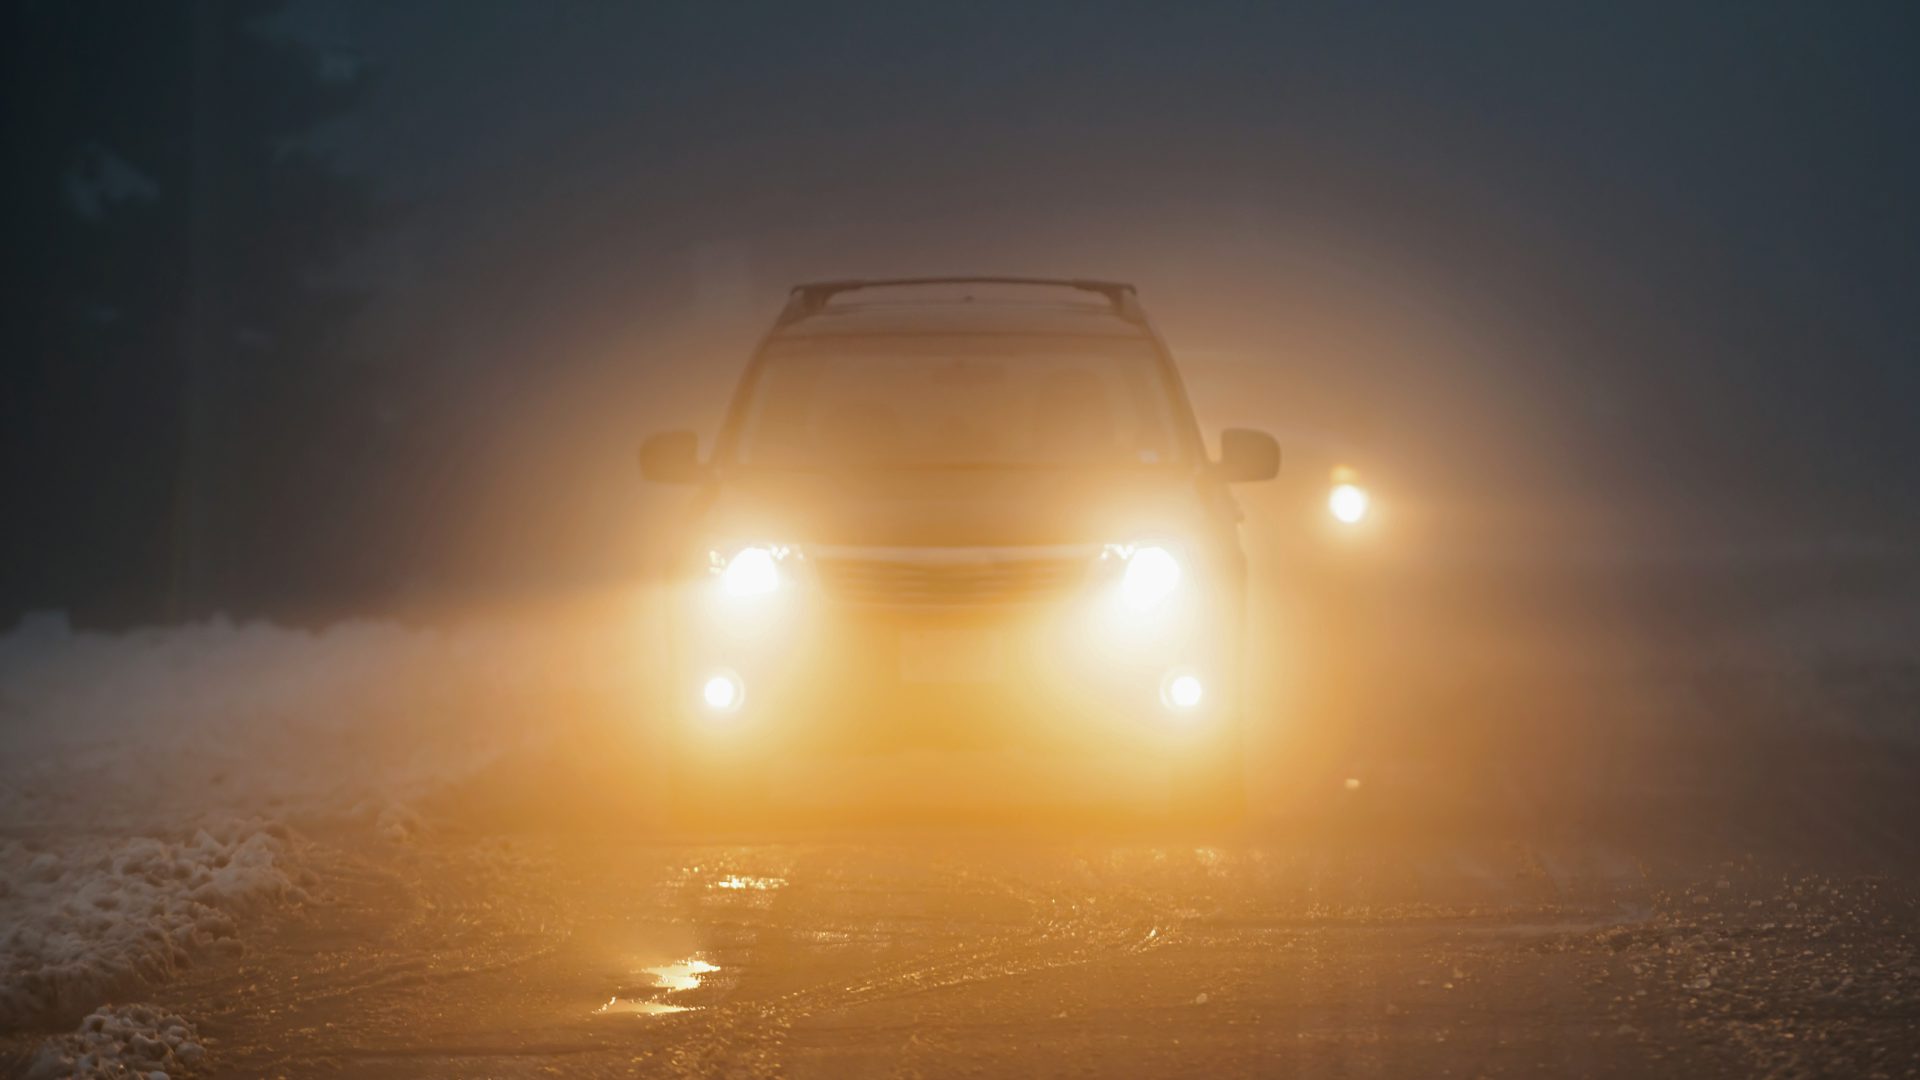 Fog Lights Explained: What They Are & When to Use Them